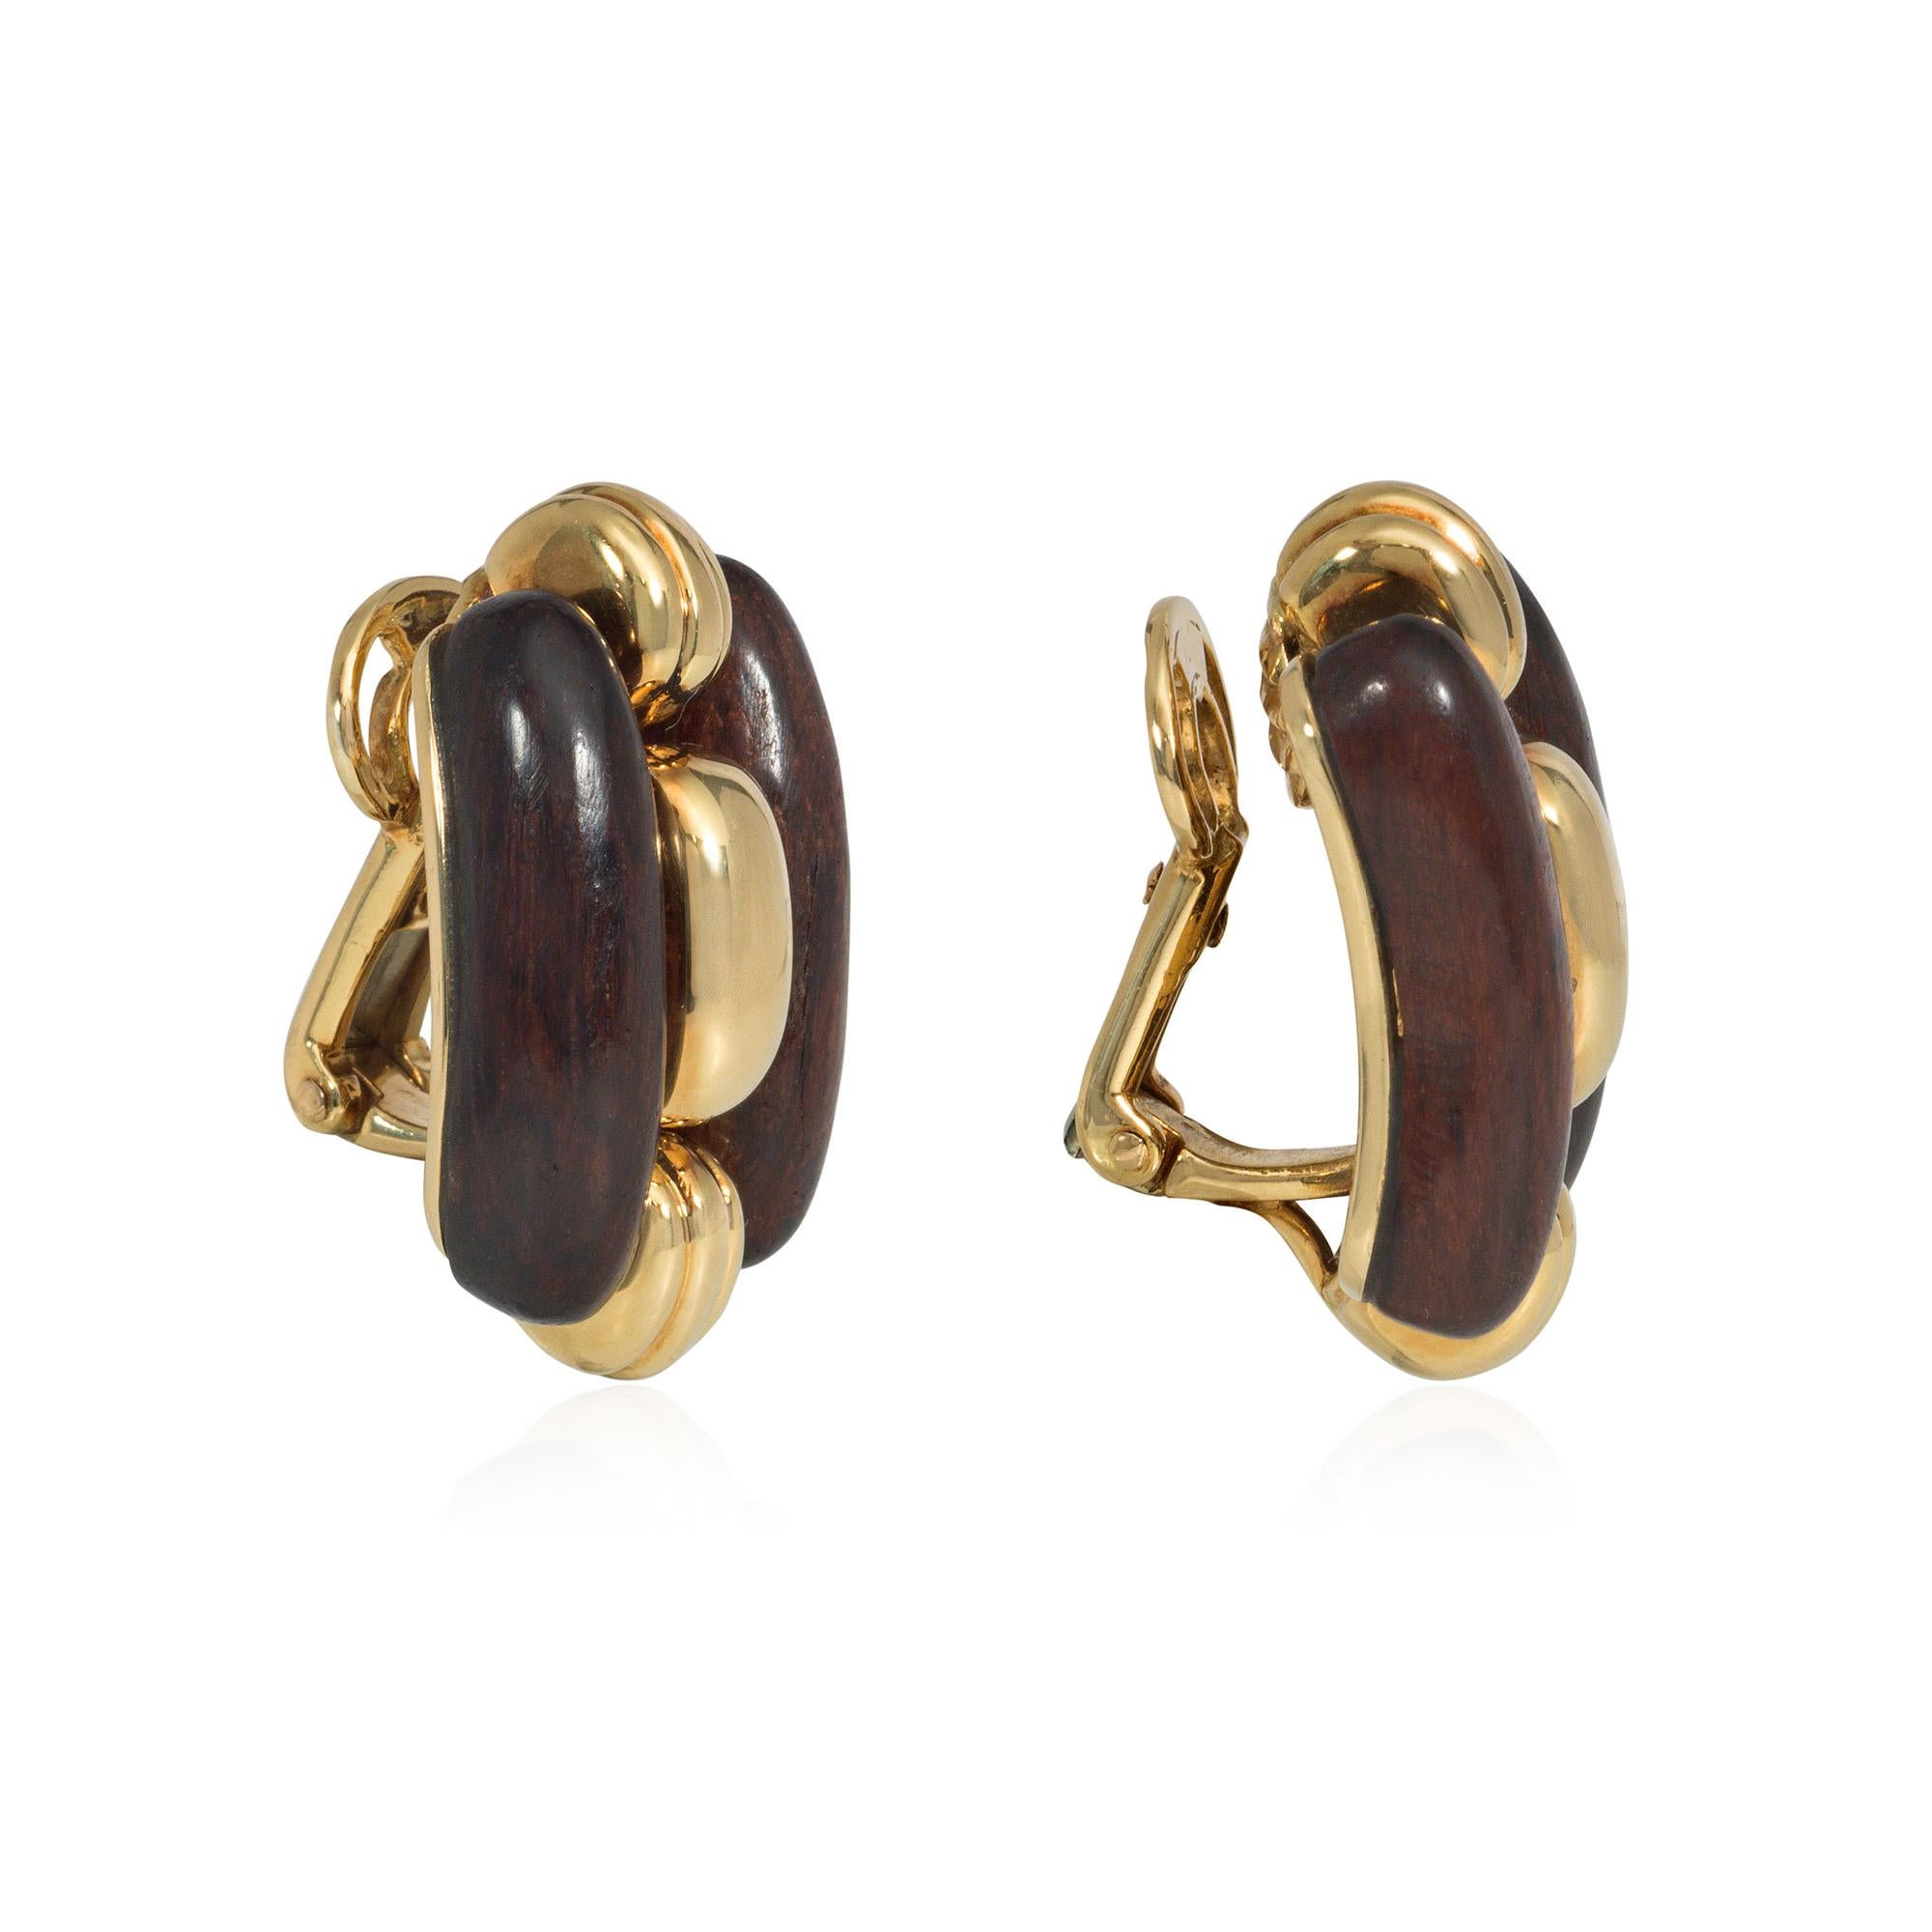 A pair of gold and wood clip earrings comprised of smooth and ridged gold segments, flanked by polished wooden borders, in 18k. Boucheron, Paris #PC870281